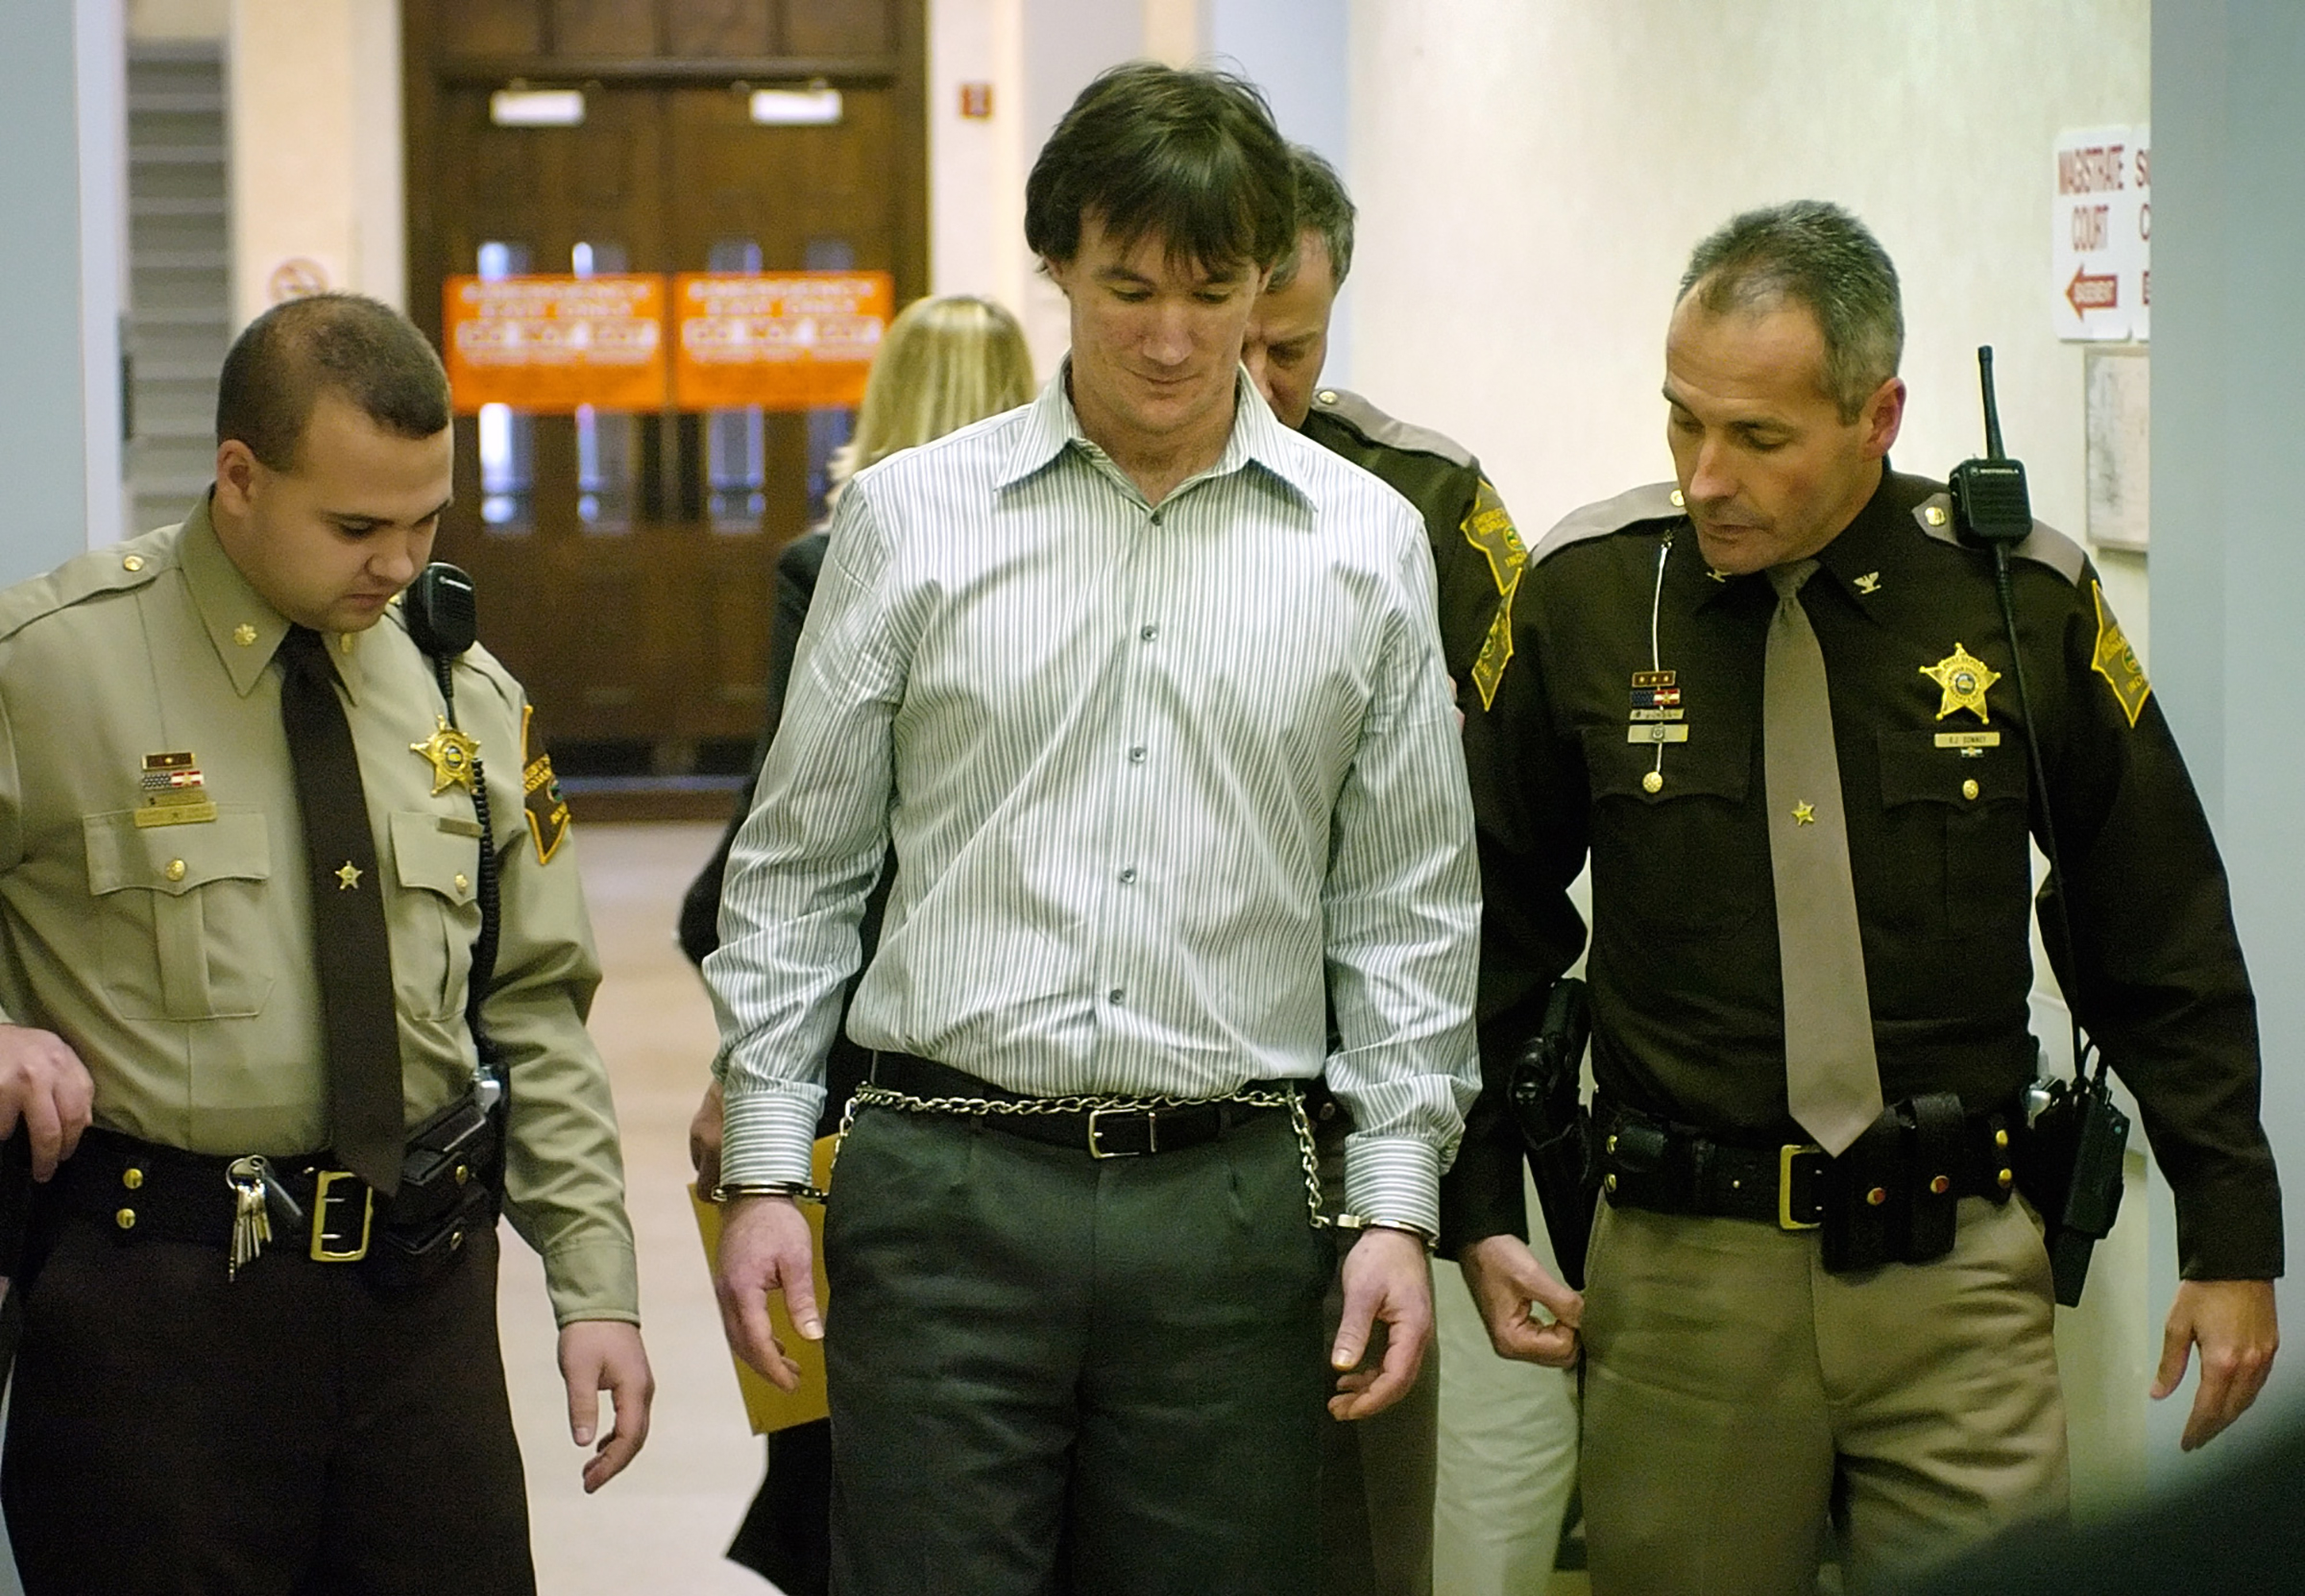 John Myers II, center, is escorted from the Morgan County Courthouse Friday, Dec. 1, 2006, after receiving a sentence of 65 years in prison for the murder Jill Behrman, 19, in May 2000. (Chris Howell—The Herald-Times/AP)